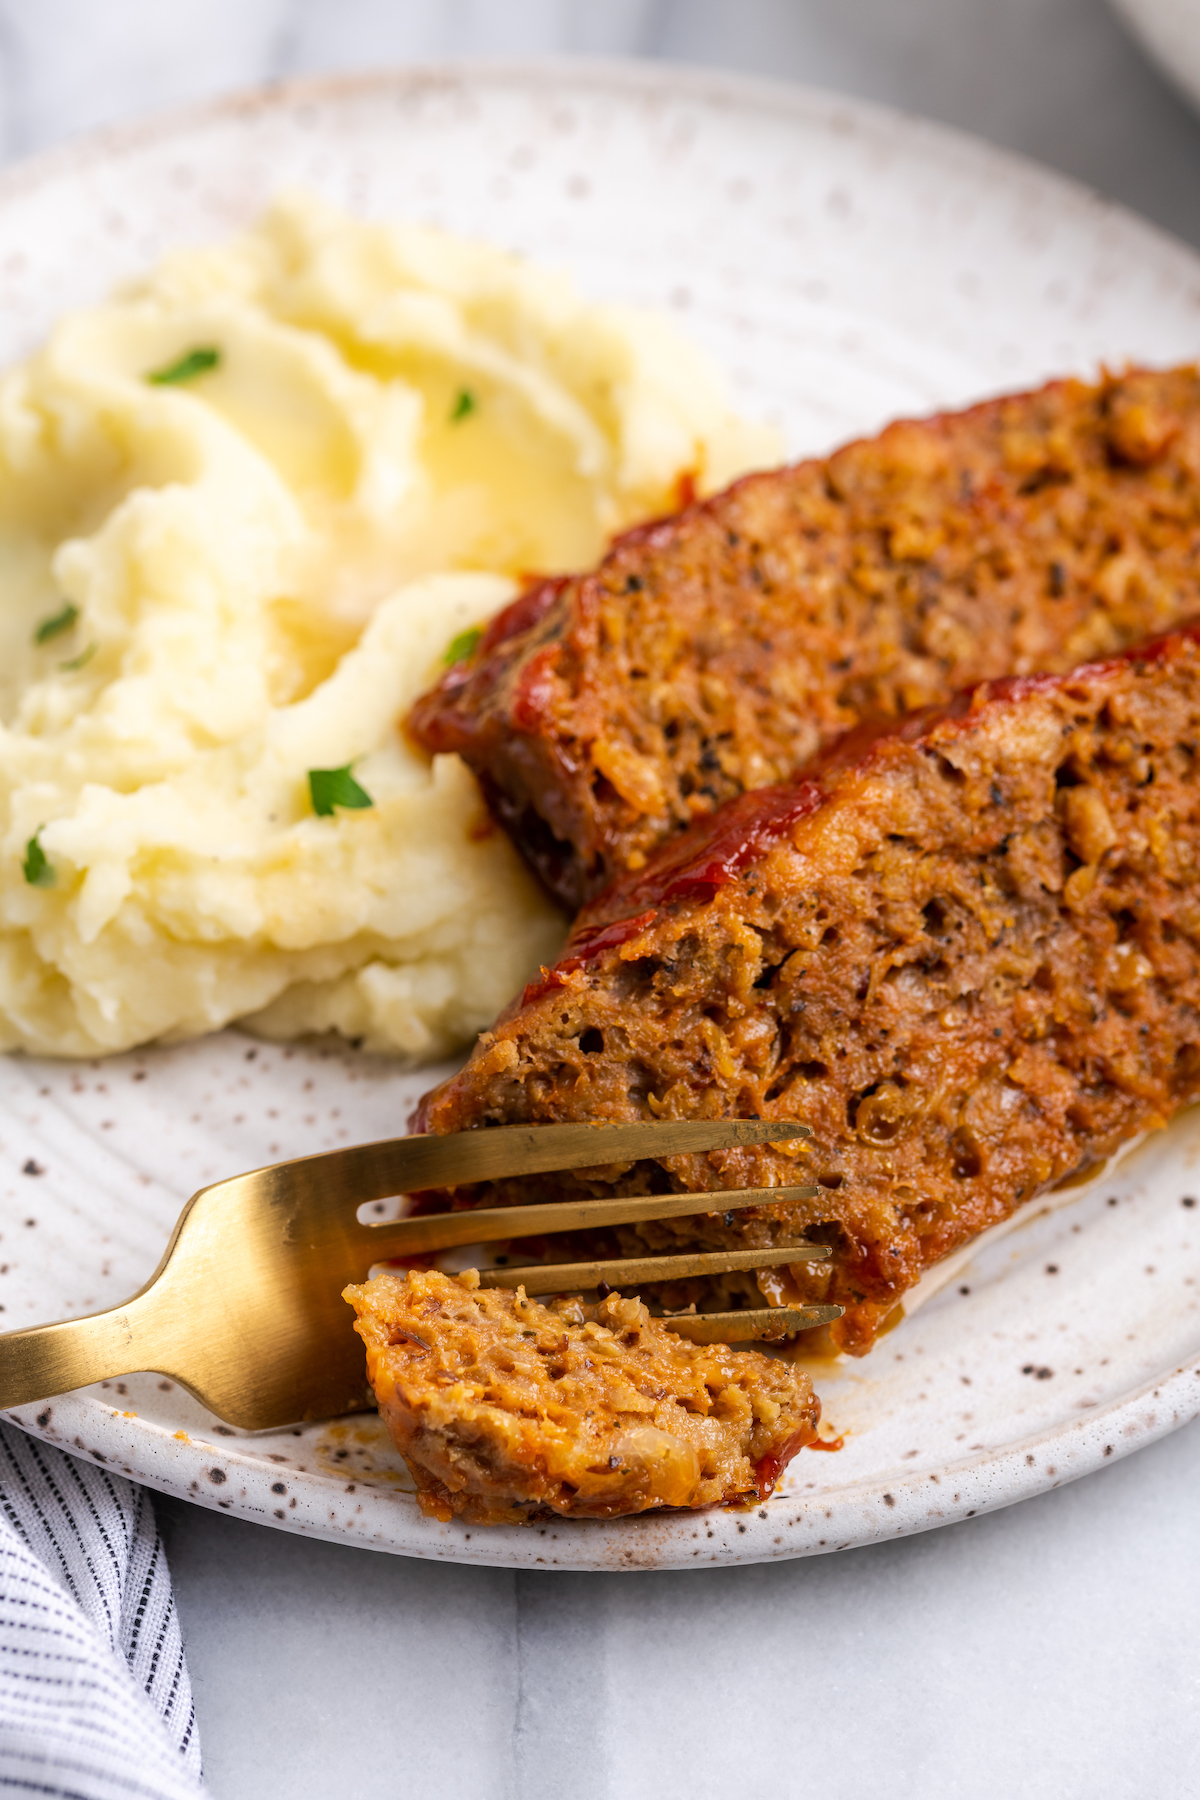 Fork cutting into vegan meatloaf on plate with mashed potatoes